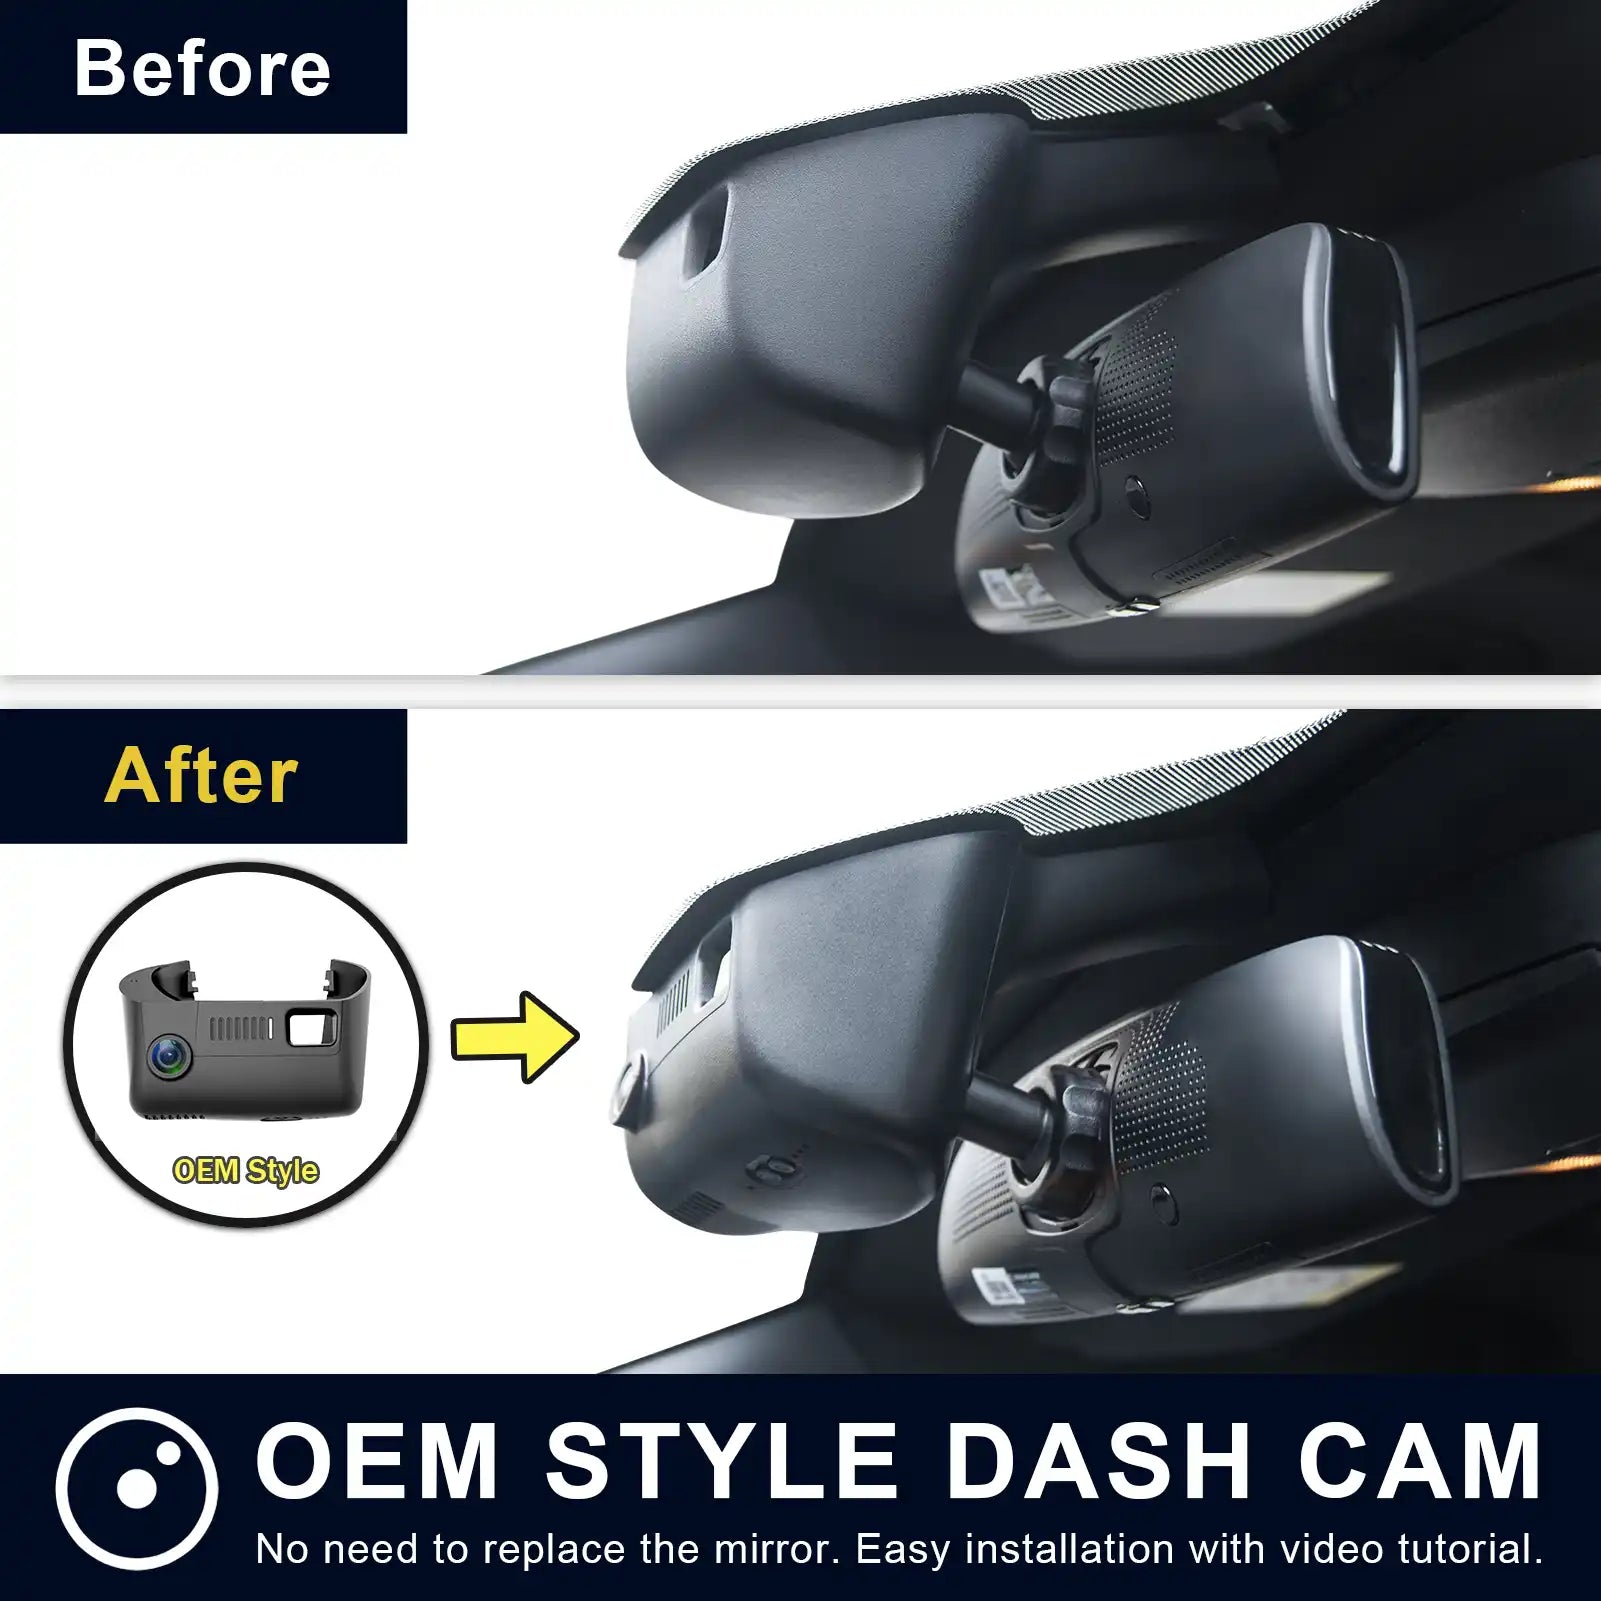 Dodge Durango before and after dash cam installation 